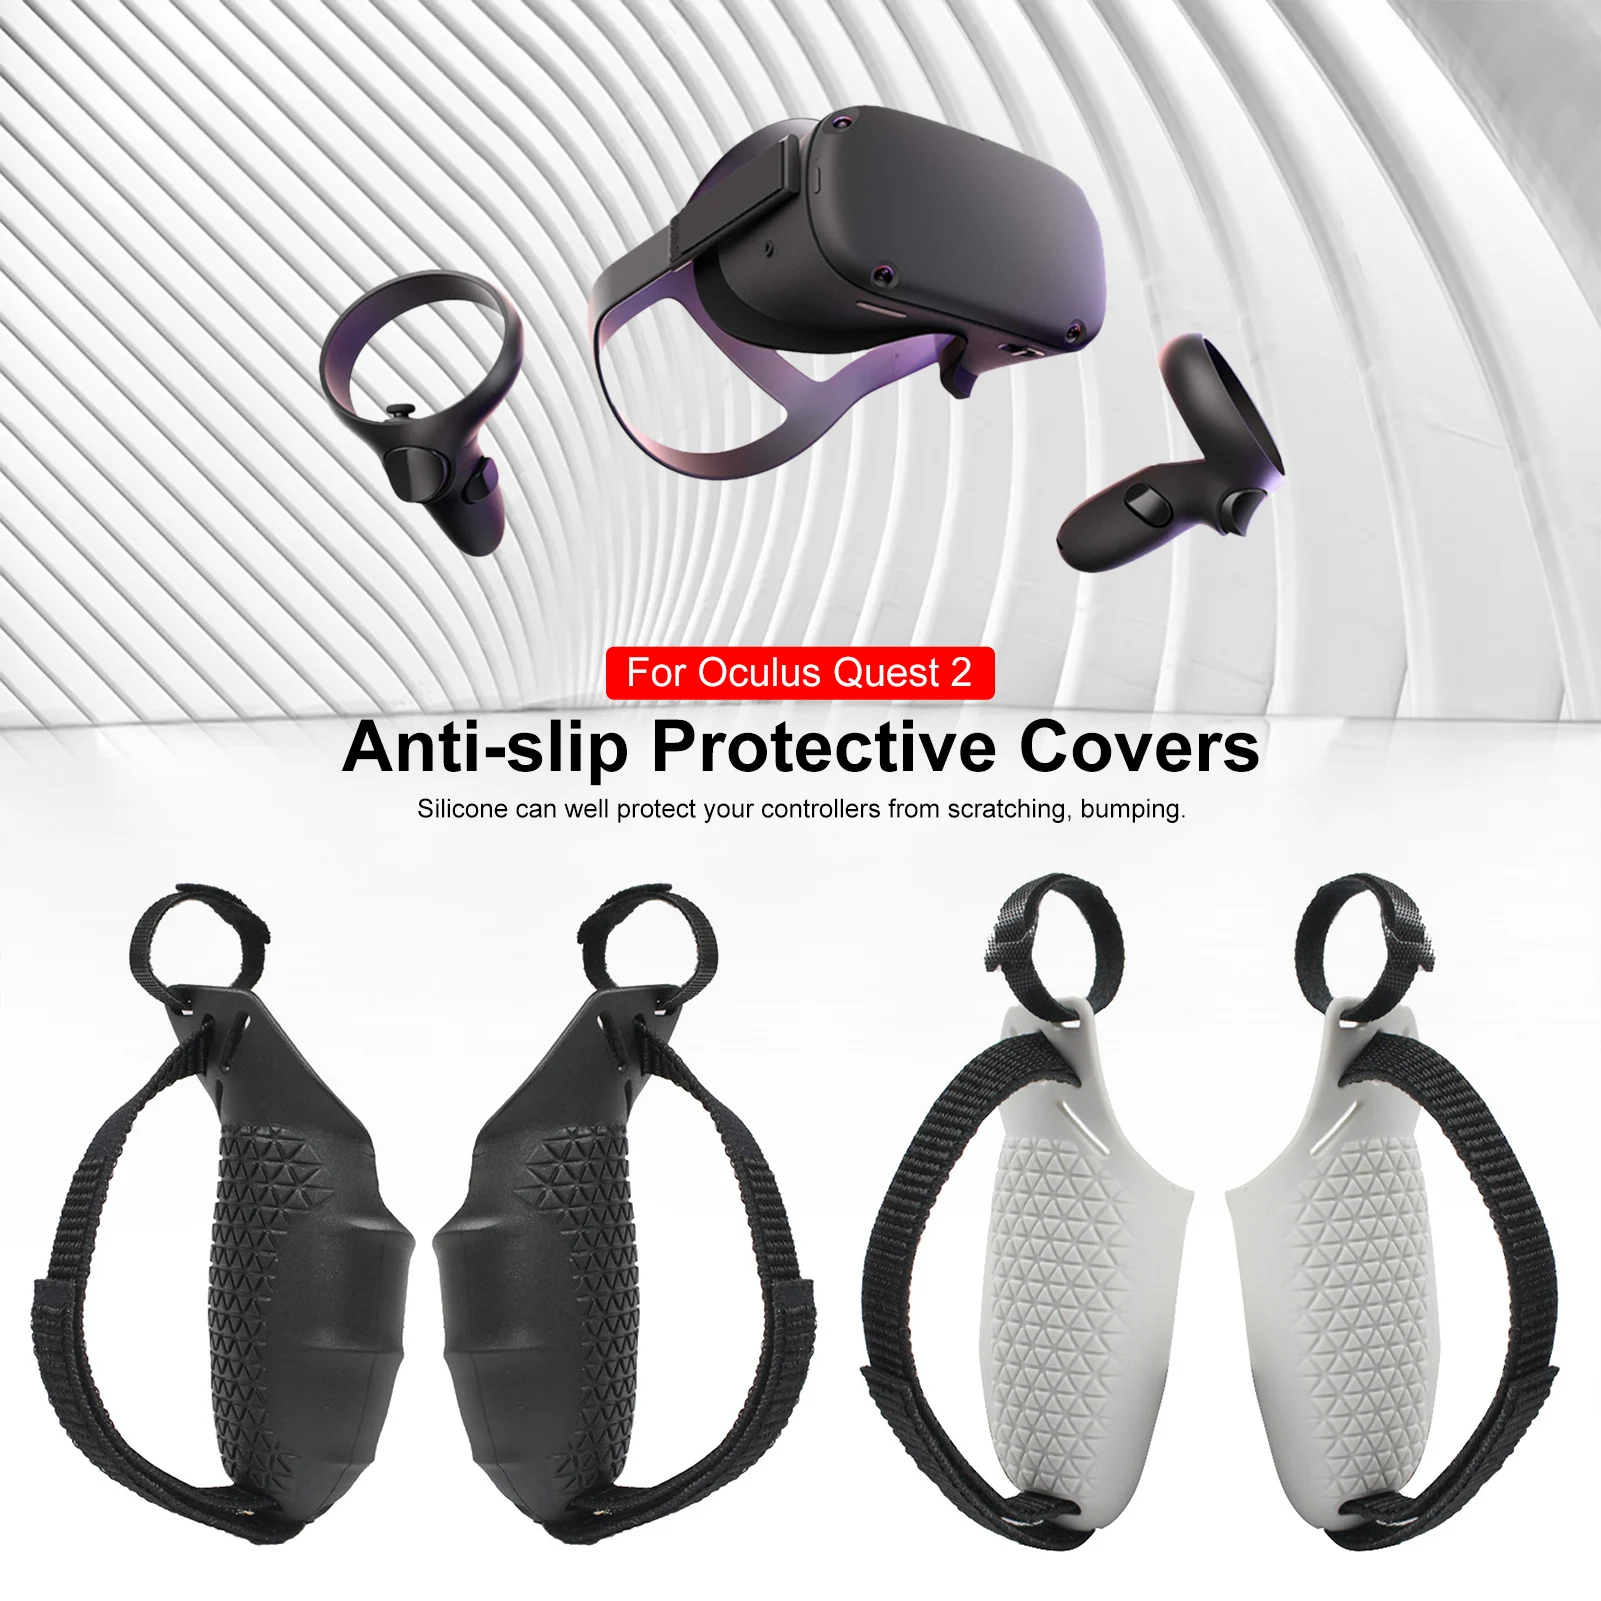 VR Accessories Protective Cover For Oculus Quest 2 Grip VR Controller Case With Knuckle Strap Handle Grip For Oculus Quest 2 enlarge